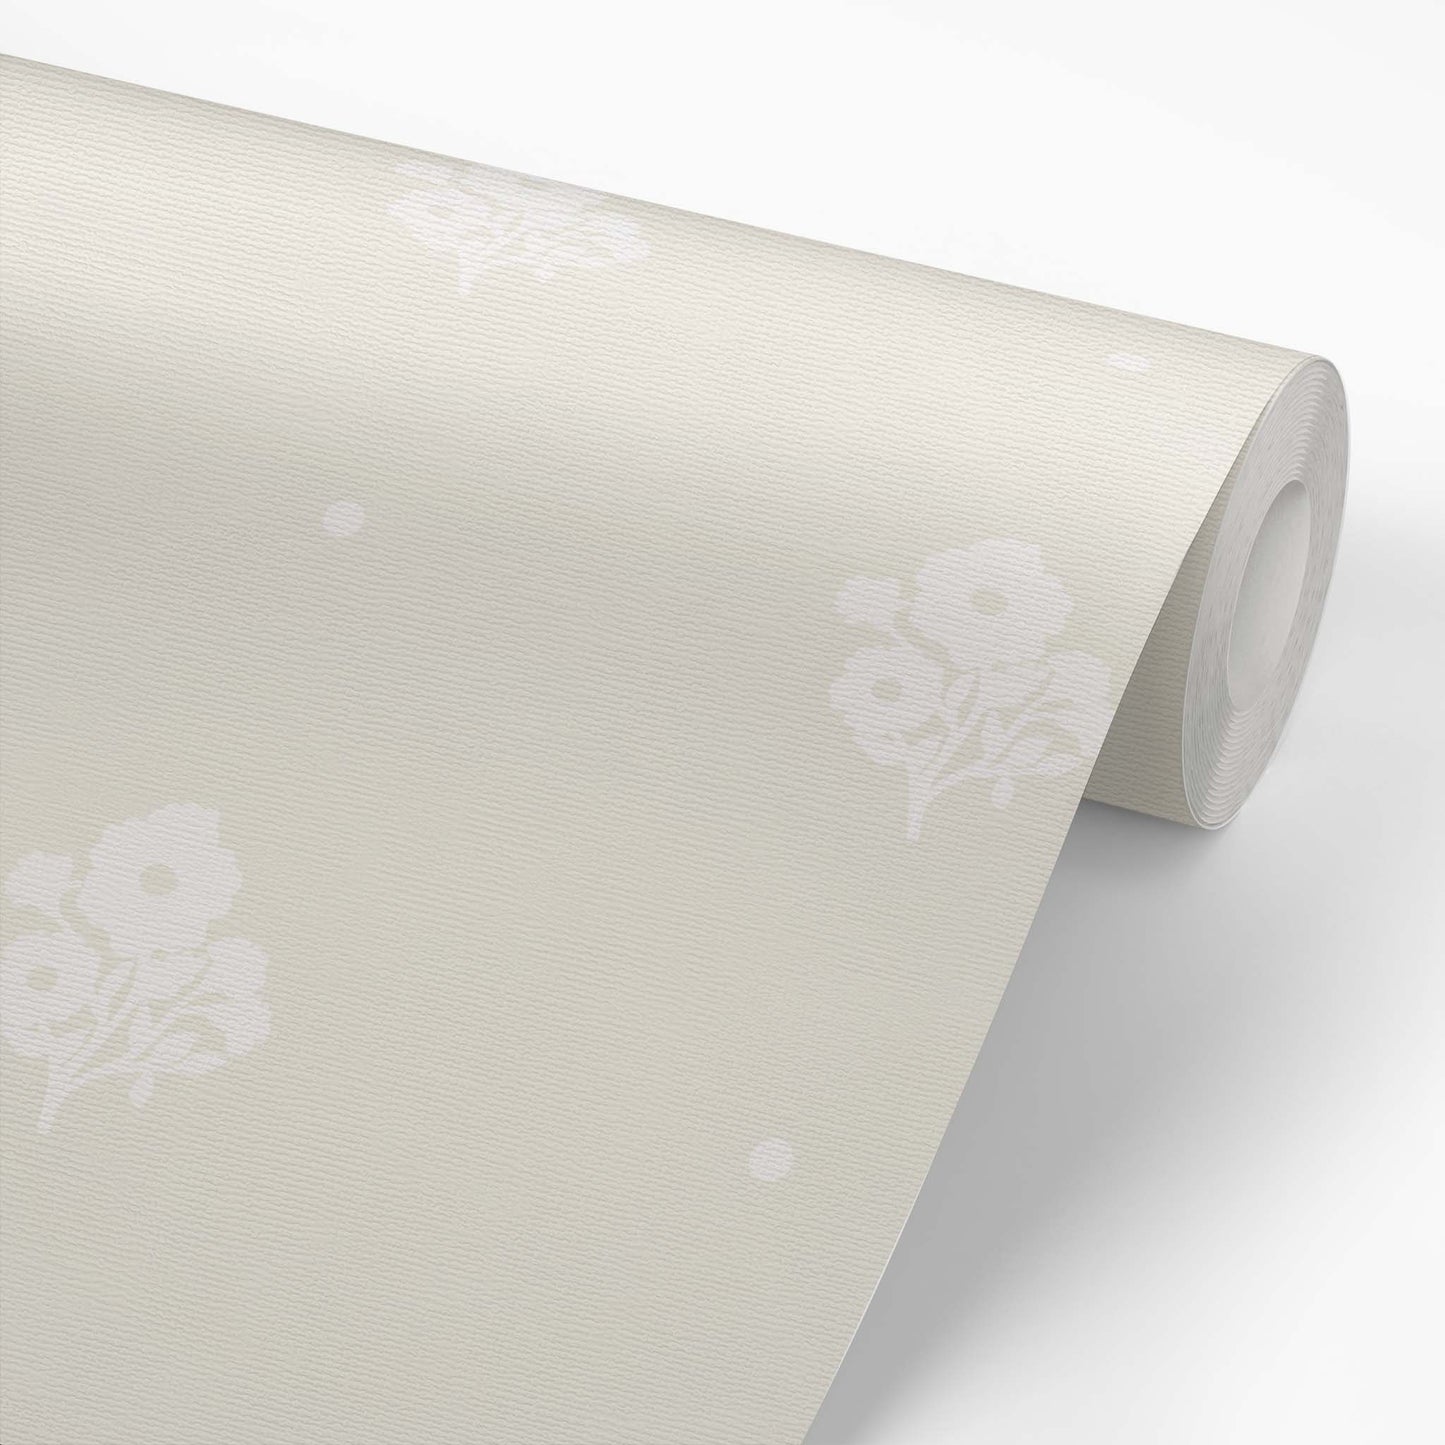 Elevate your home decor with our Cambridge Wallpaper in a sophisticated sand shown on a wallpaper roll.